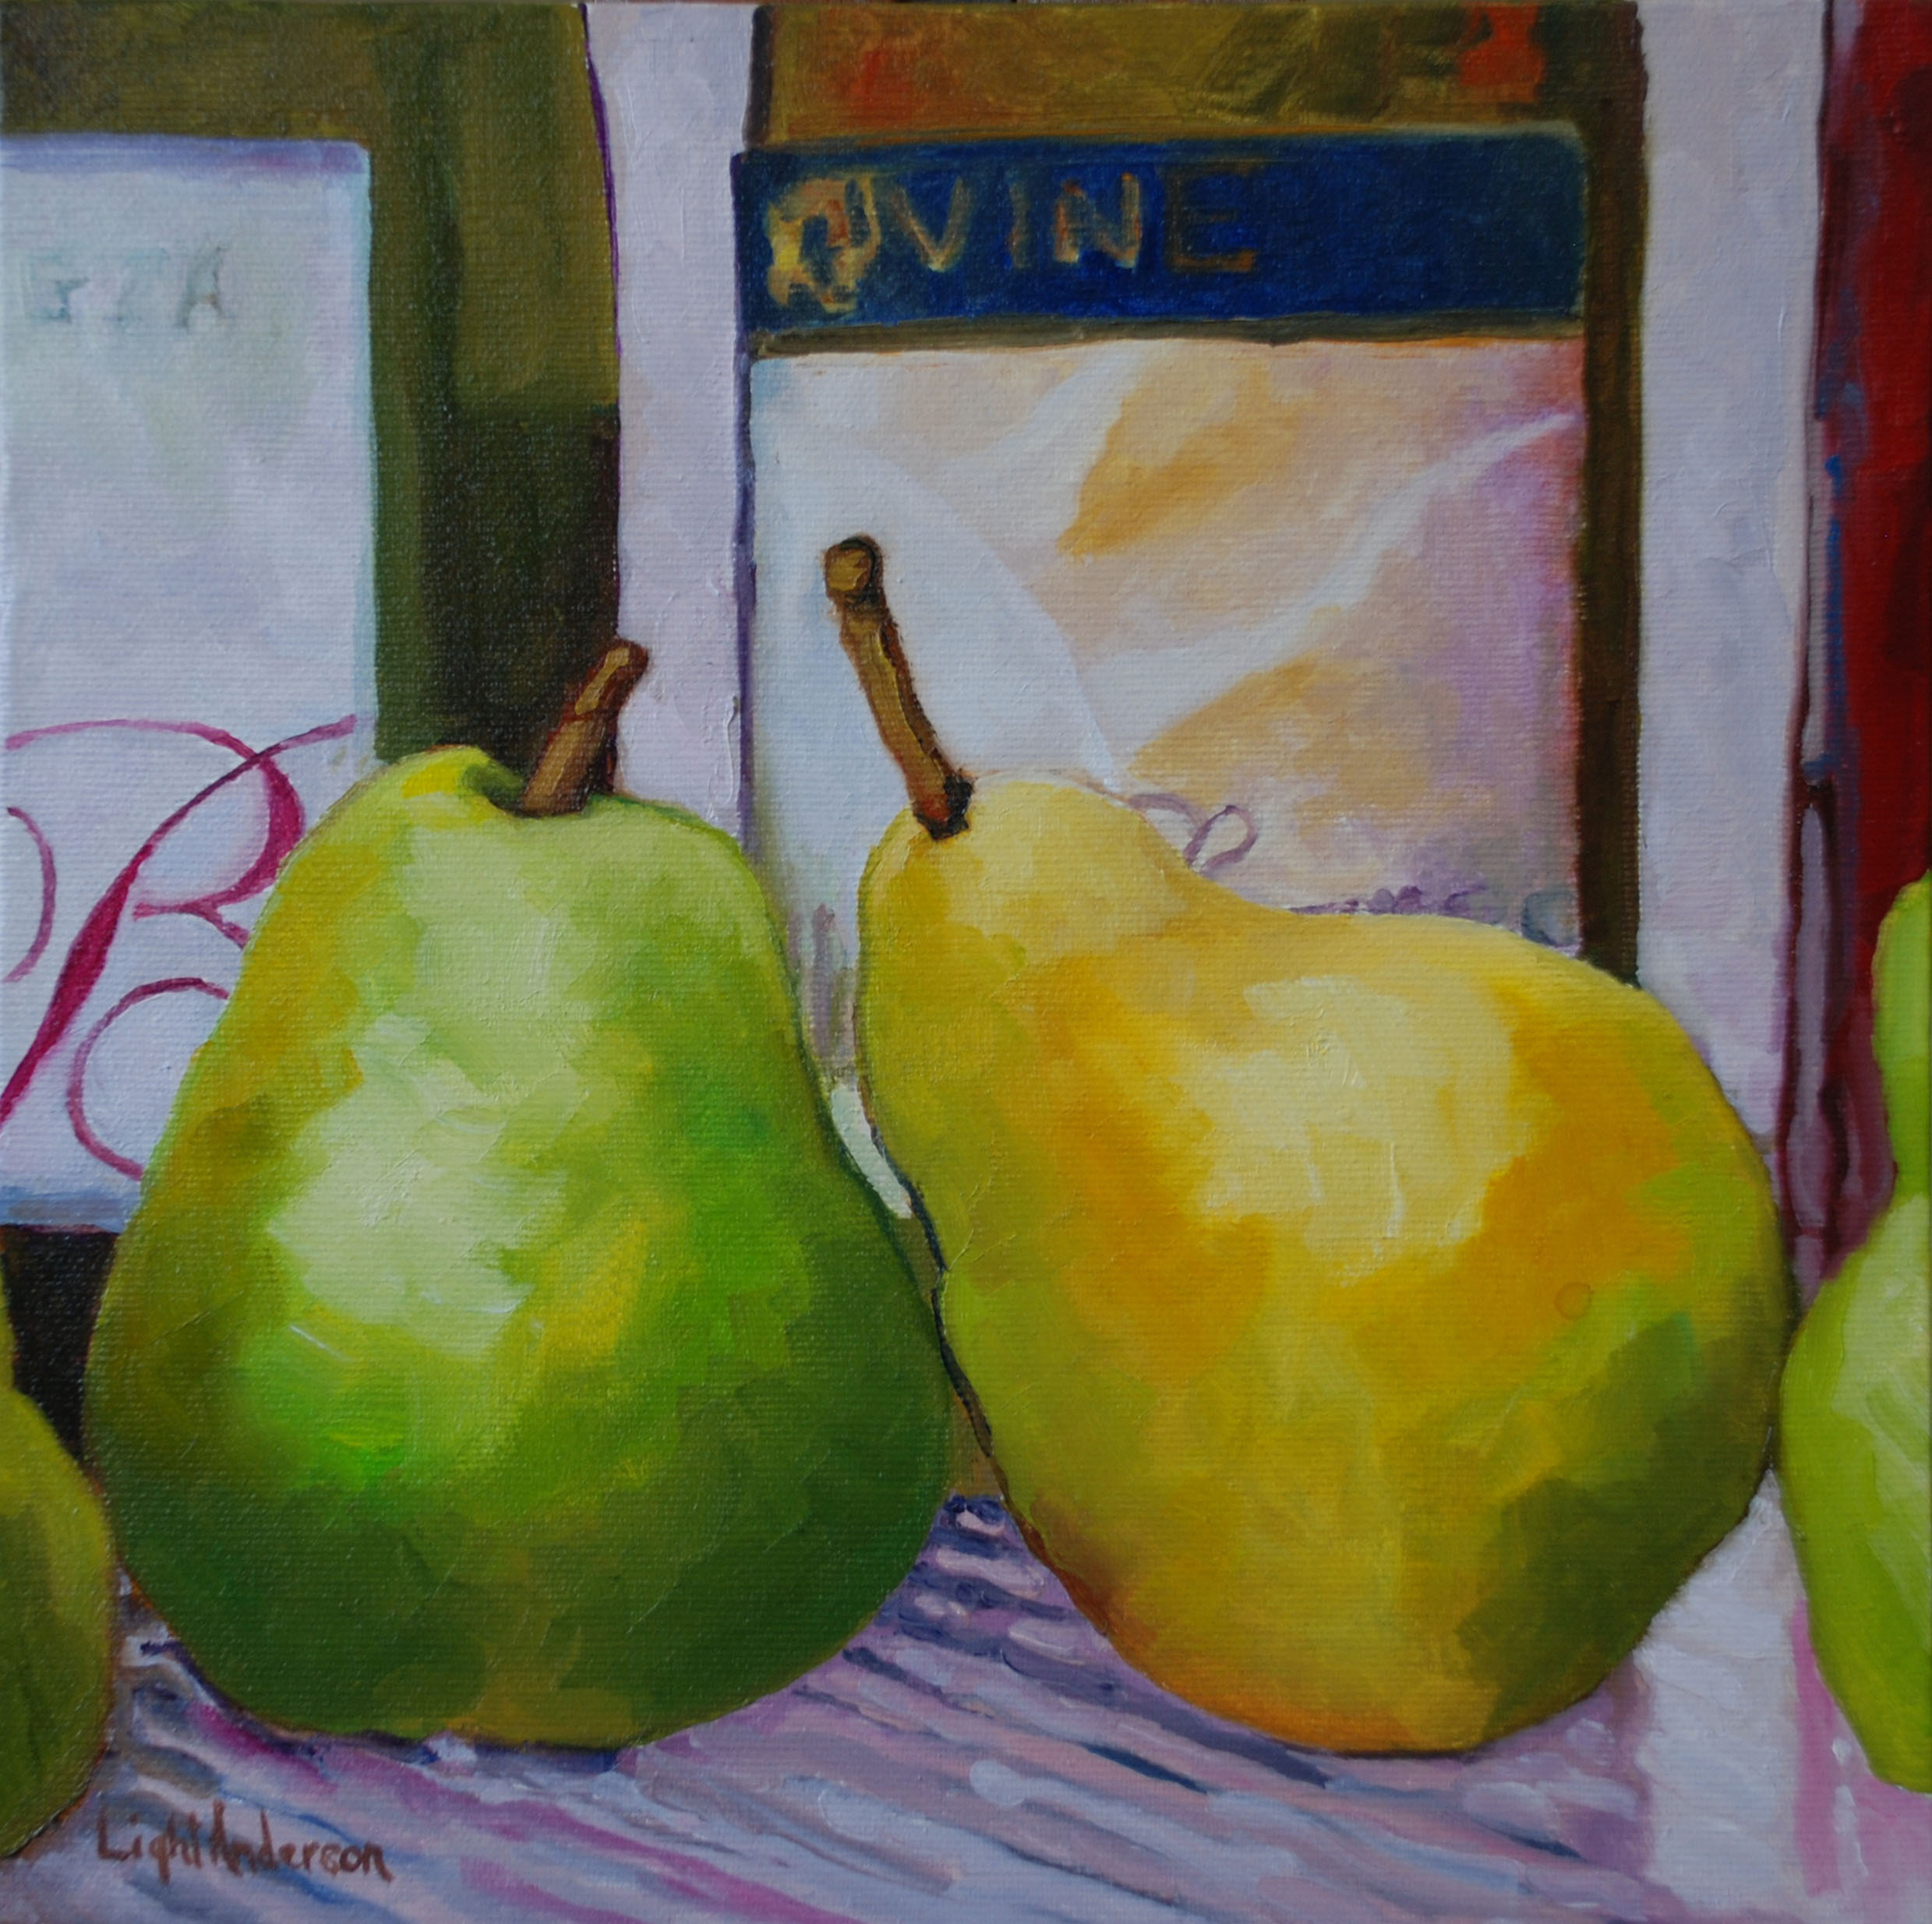 Pears and Wine